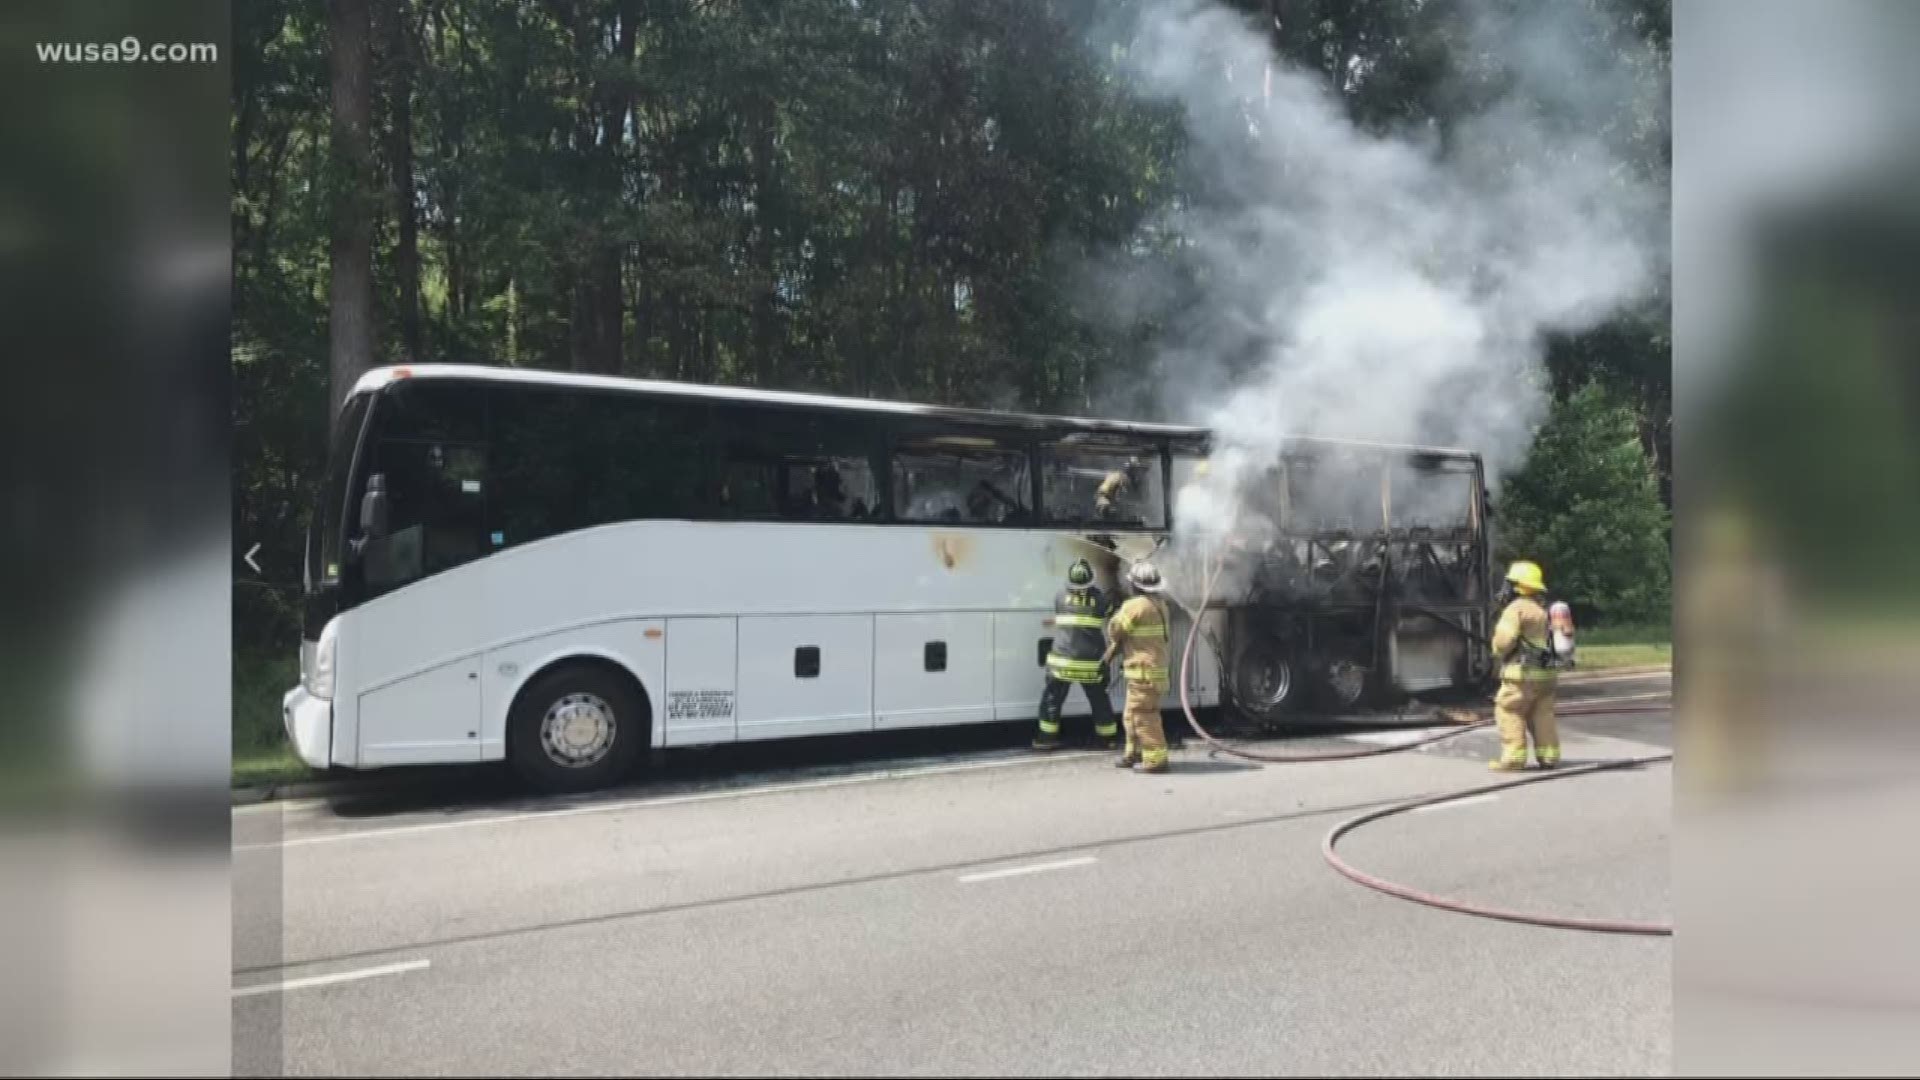 The southbound lanes of the BW parkway are now open near 193 in Greenbelt. Crews removed a charred charter bus from the scene. The bus caught fire on the parkway just after two Saturday. None of the 57 passengers on board were hurt.